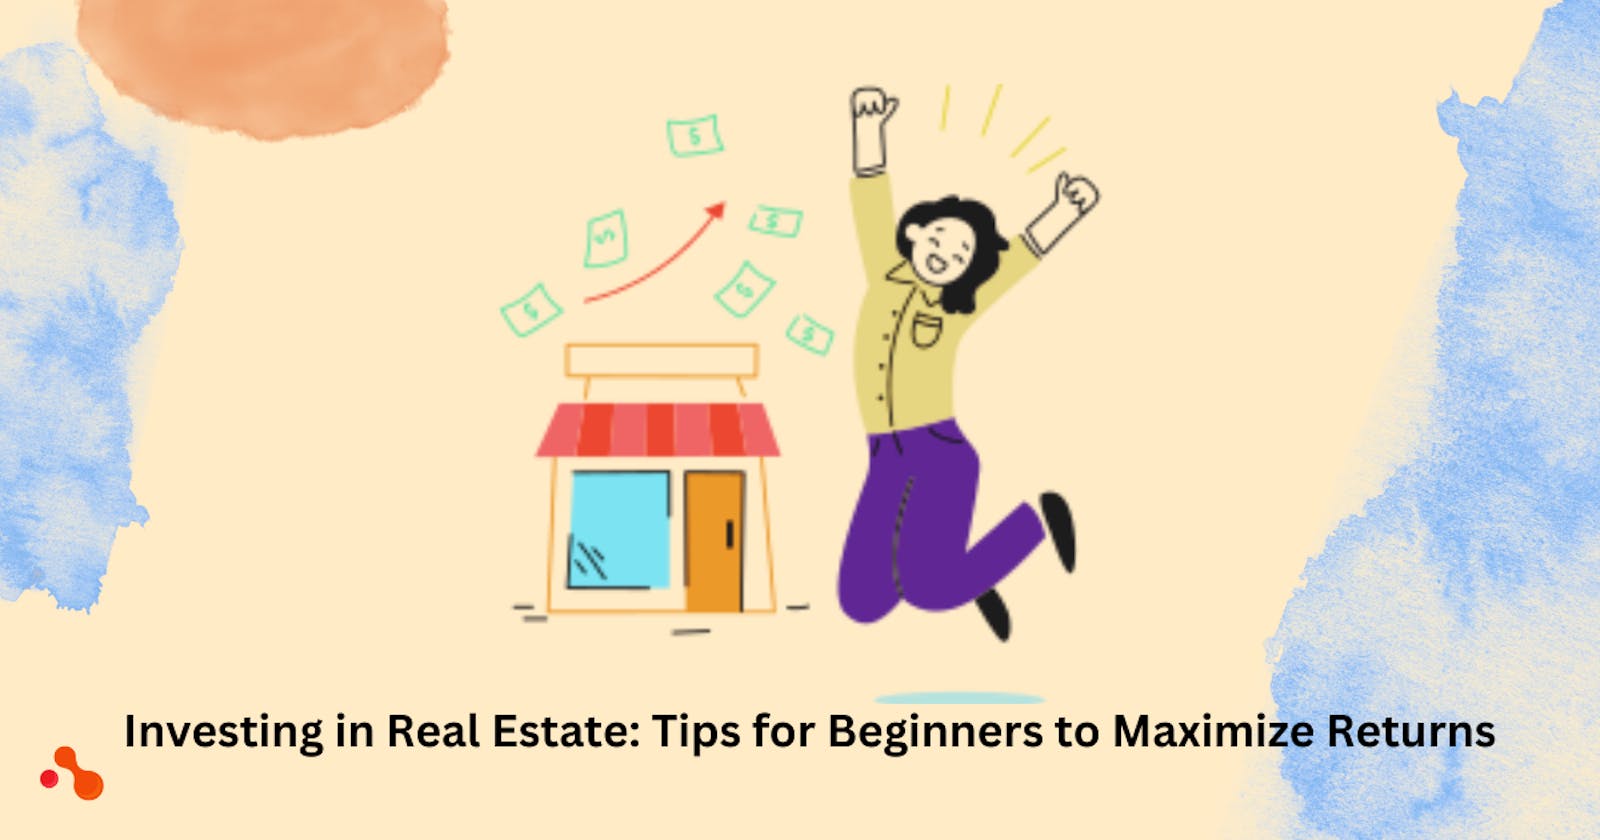 Investing in Real Estate: Tips for Beginners to Maximize Returns